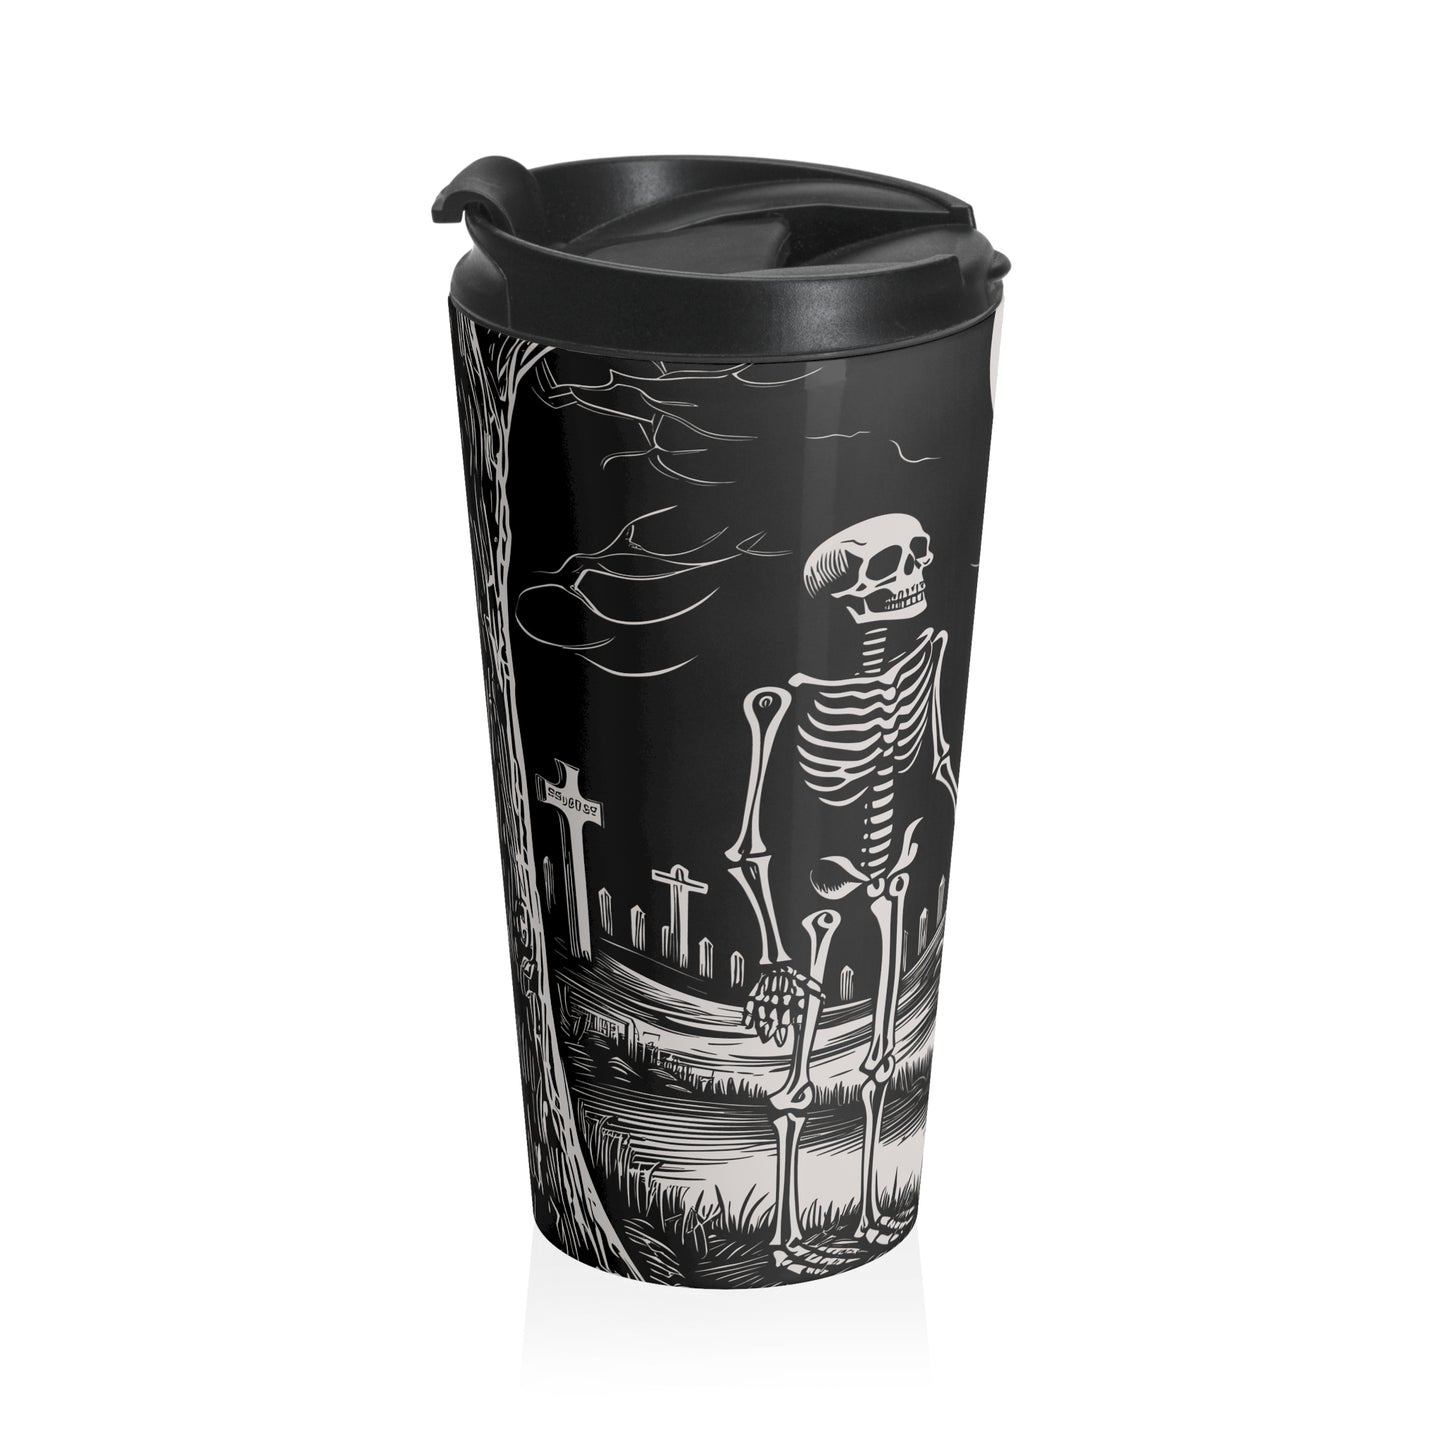 "A Casual Stroll" Stainless Steel Travel Mug